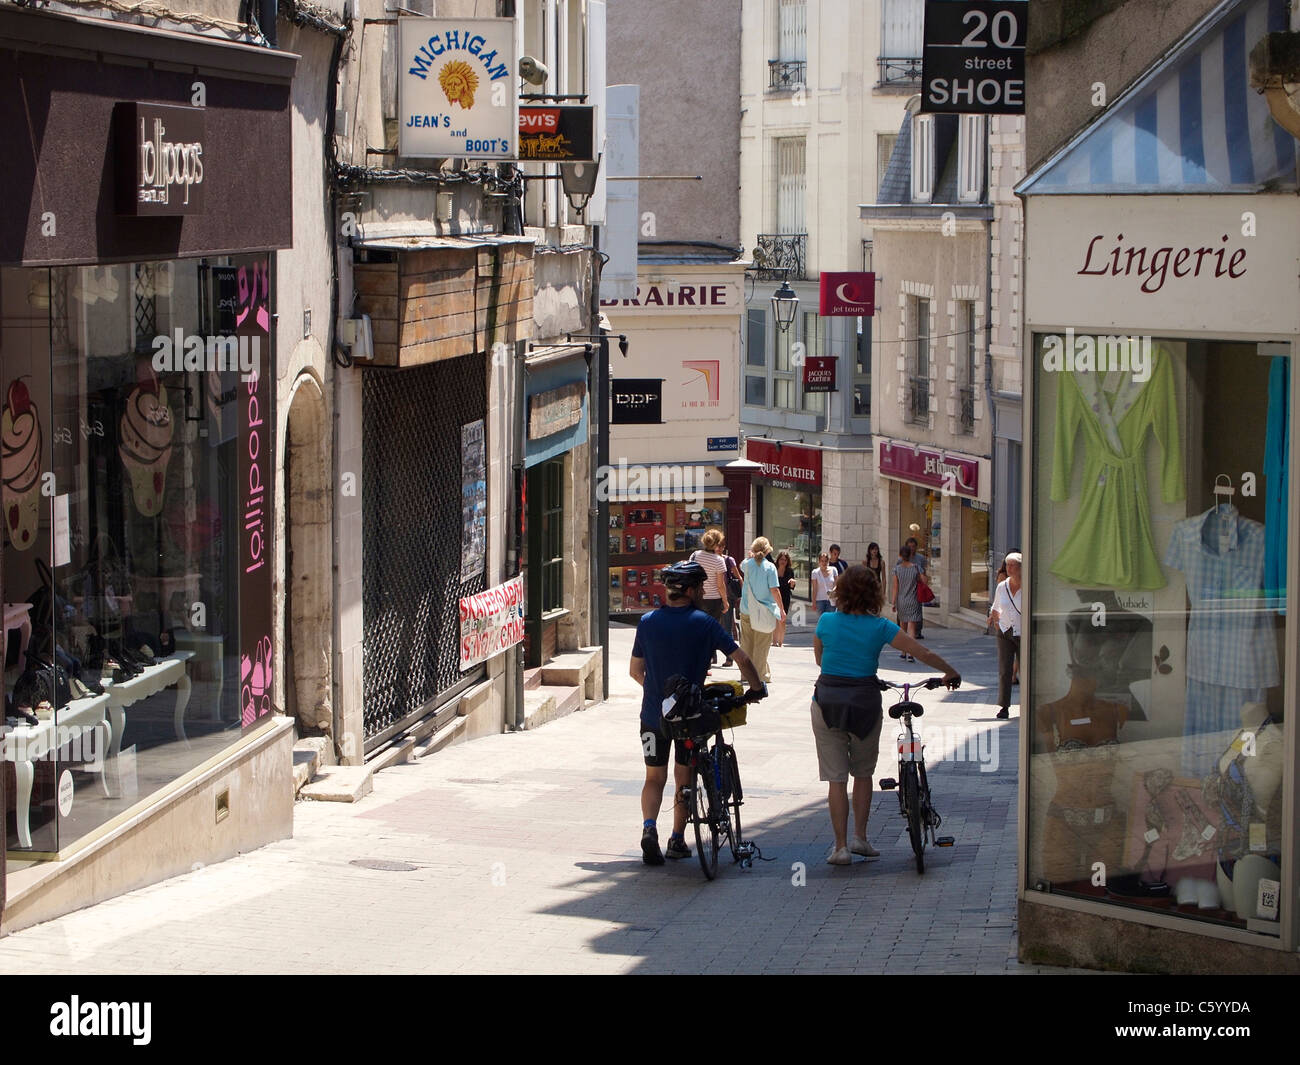 Some of the shopping streets in Blois are very steep. Loire Valley, France Stock Photo